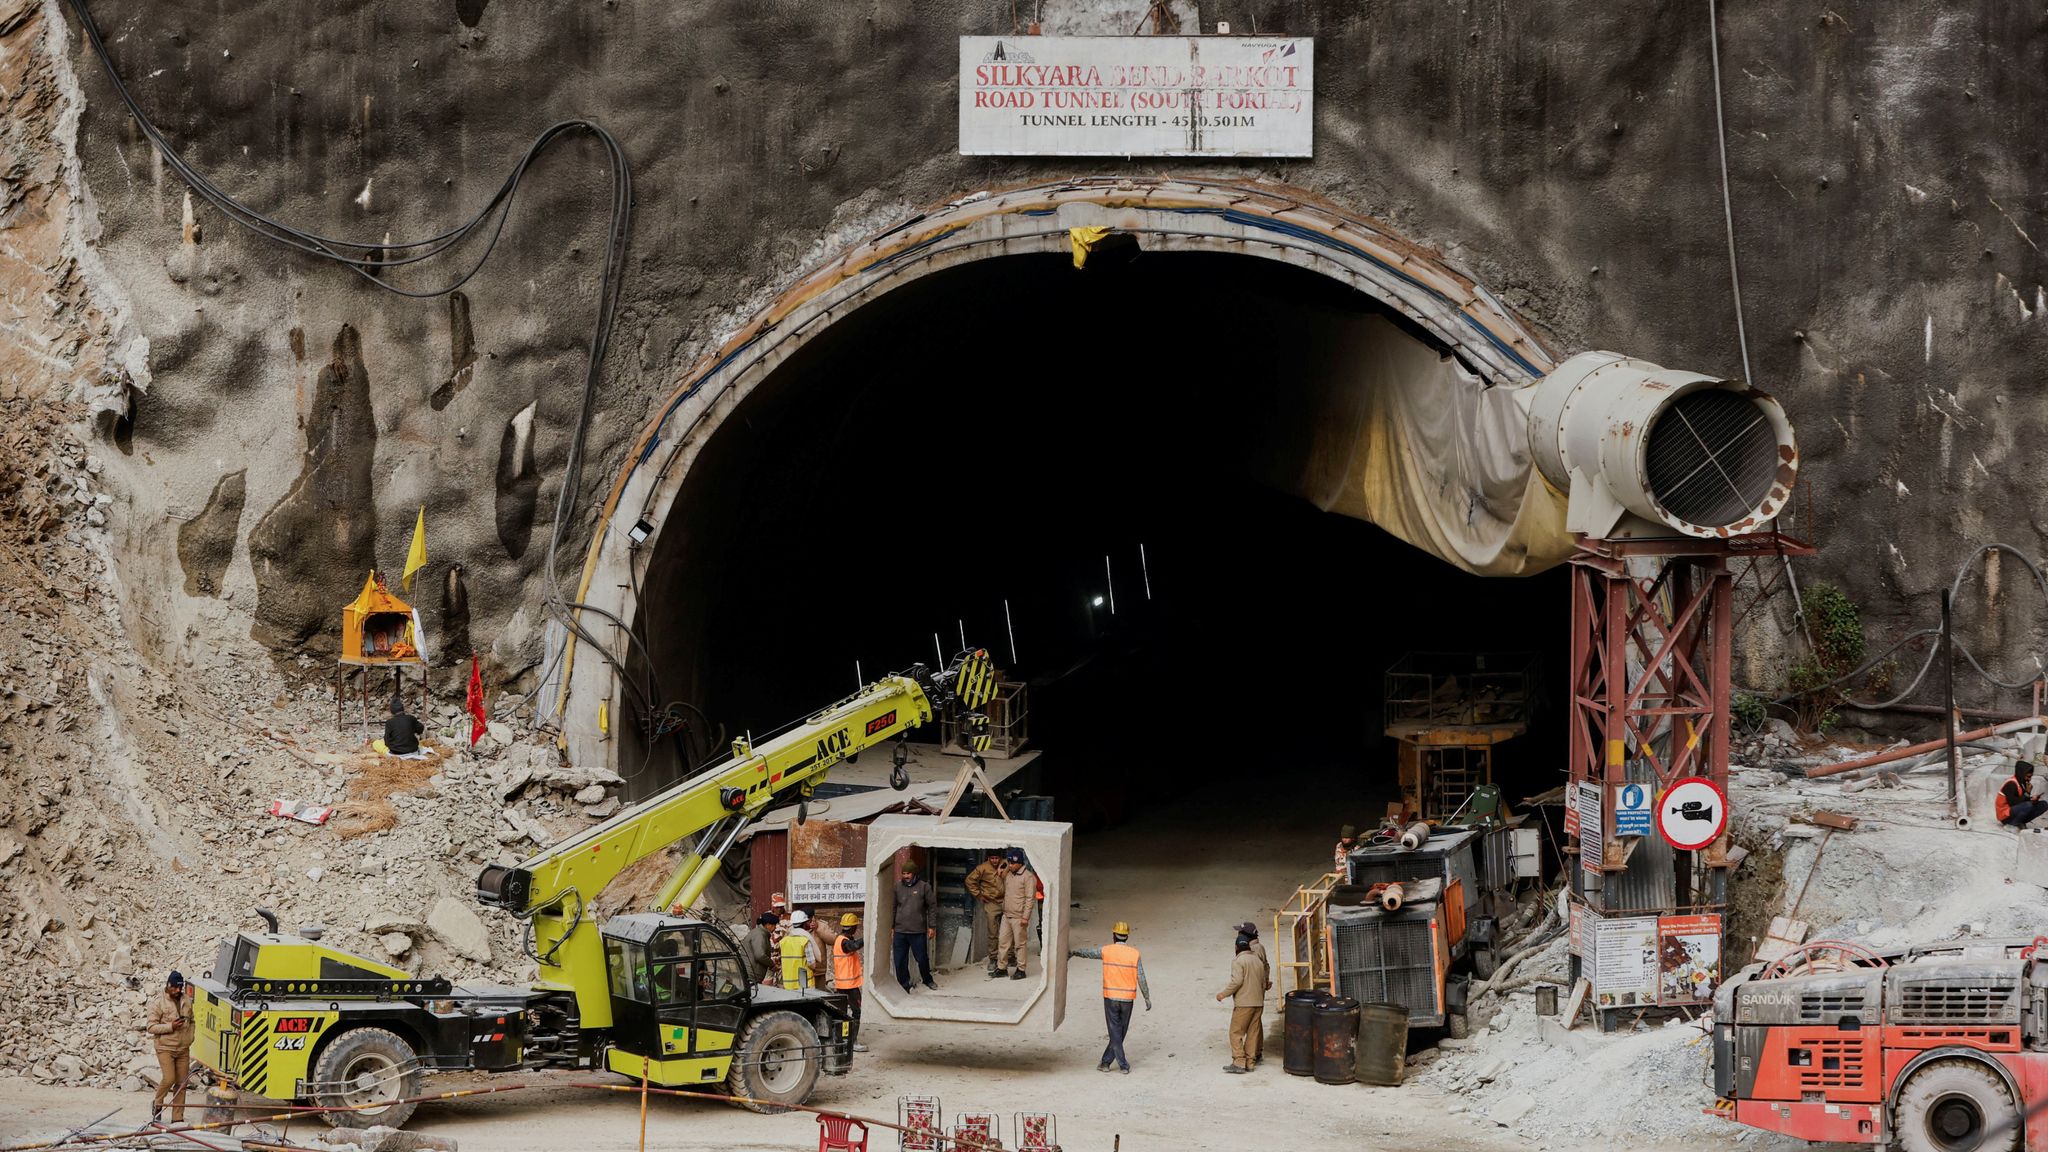 Media Commentary on India Tunnel Rescue